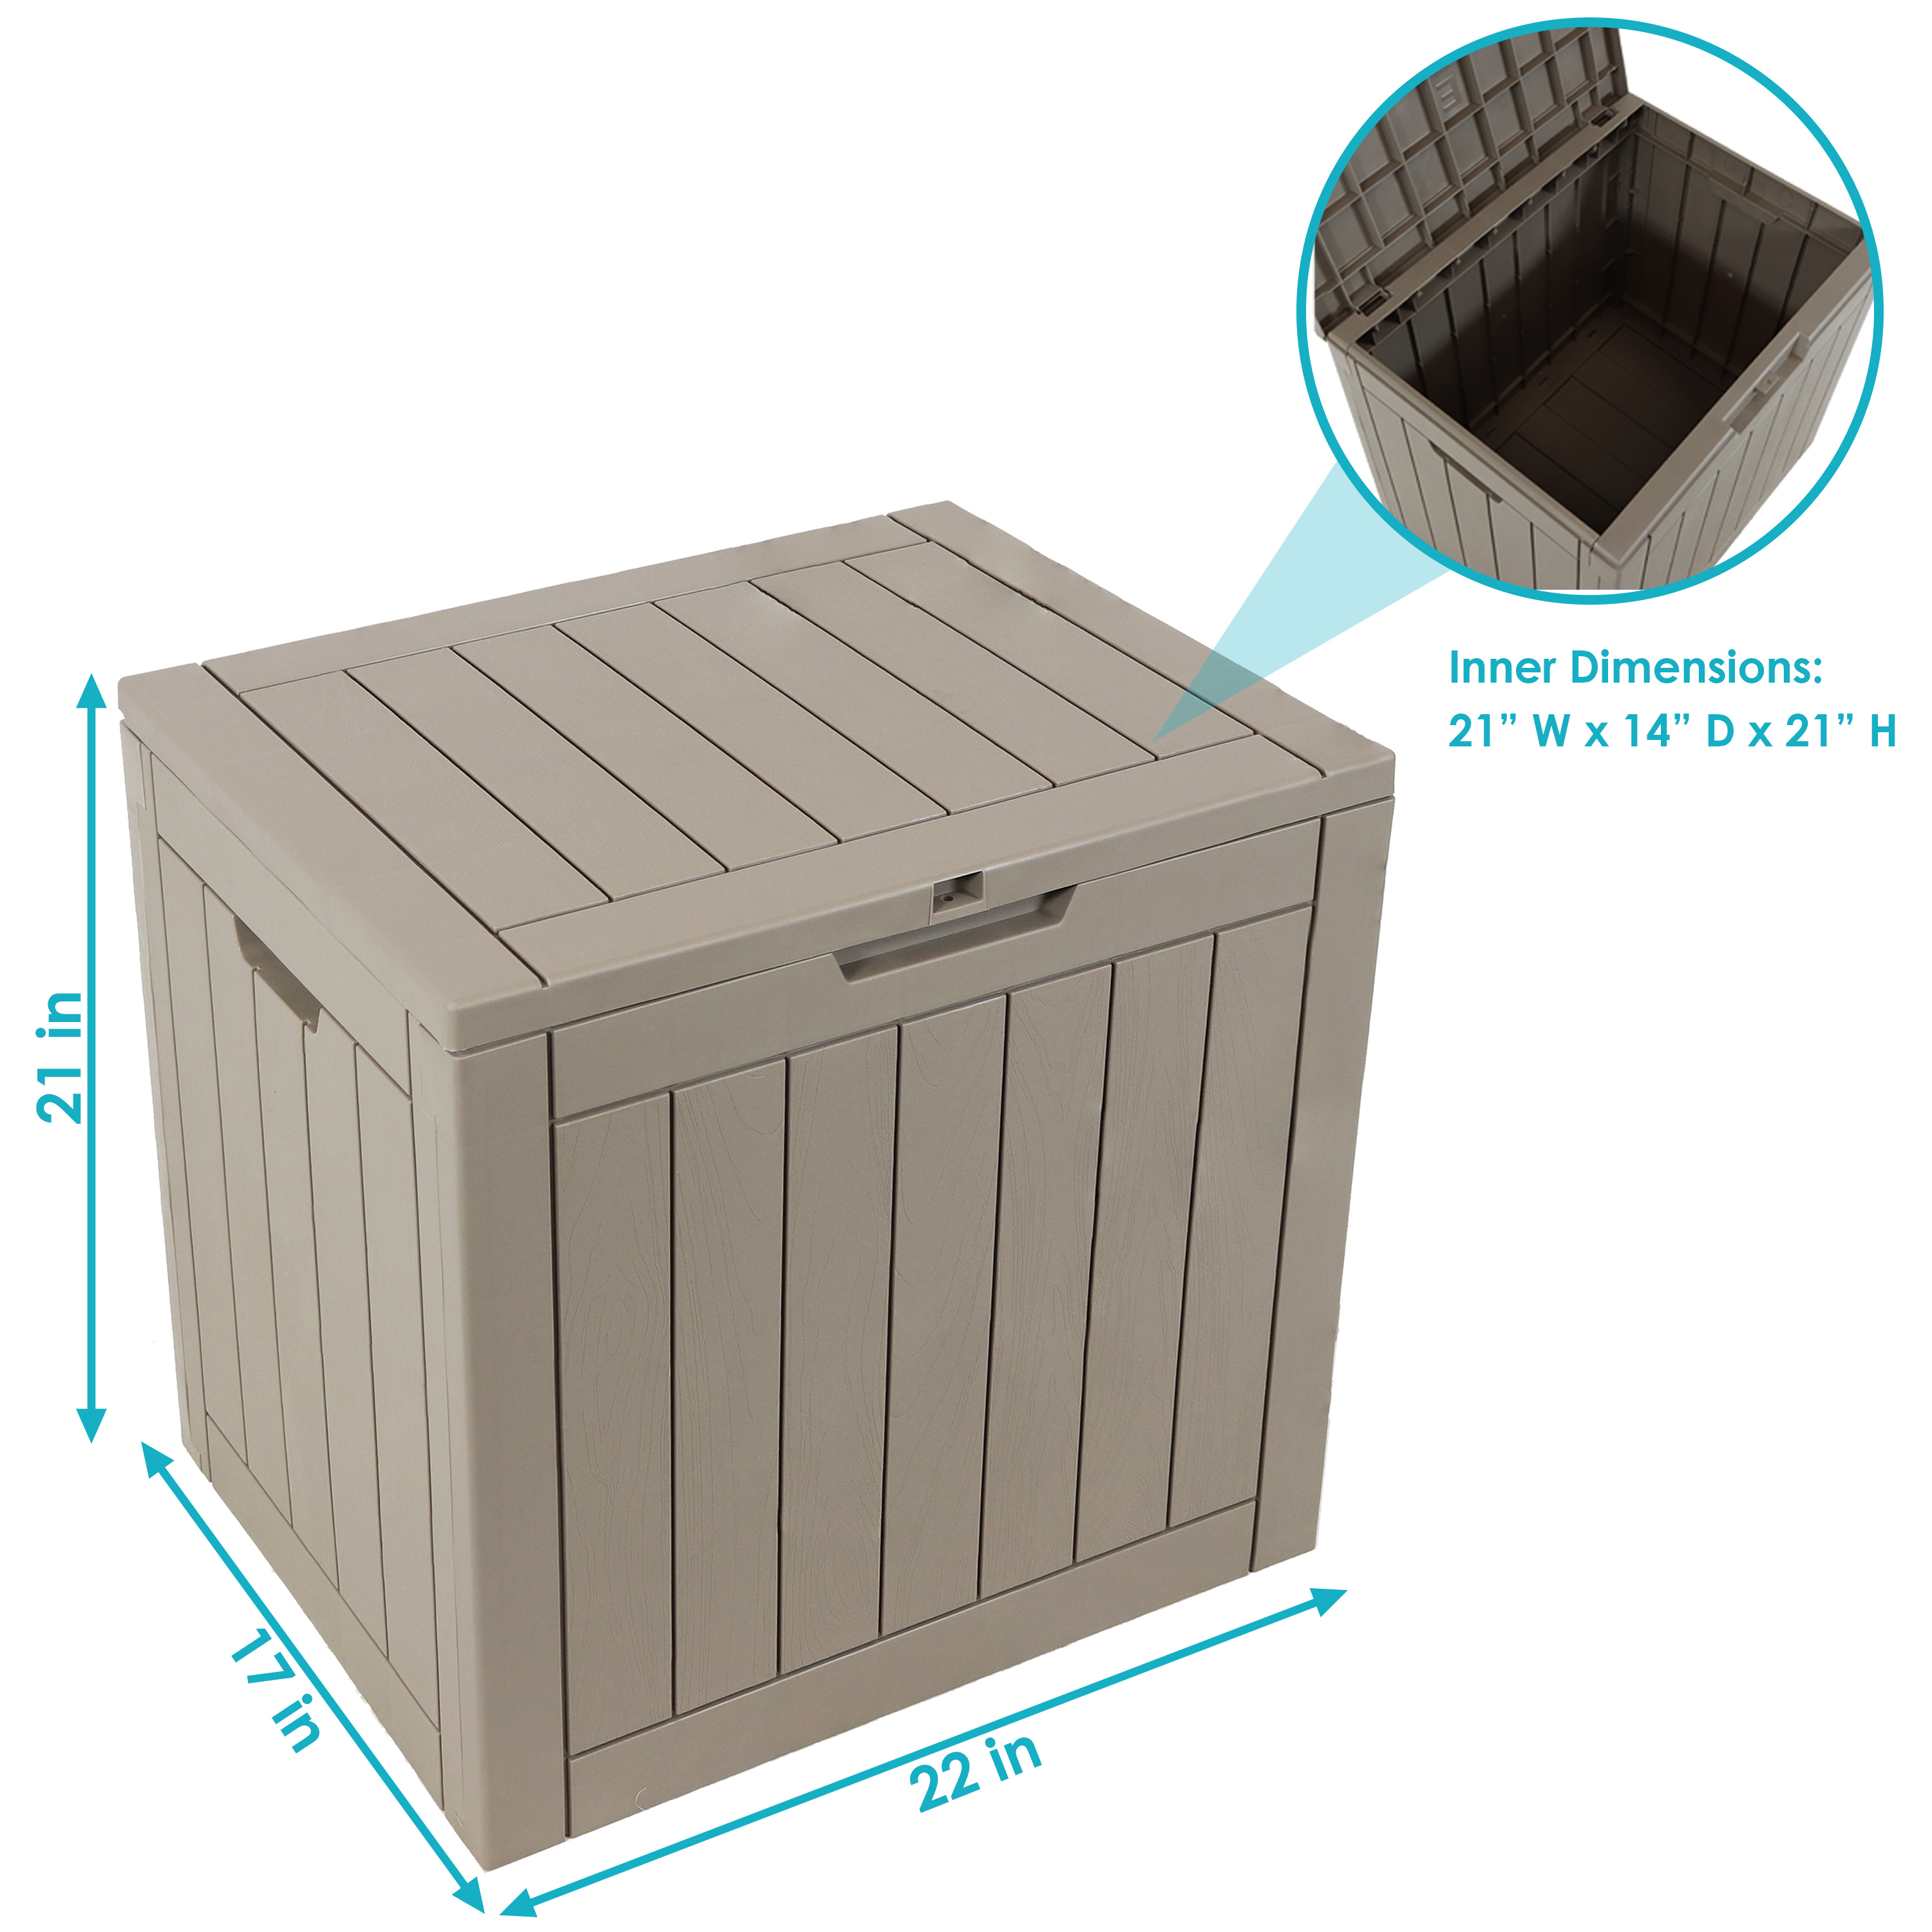 Sunnydaze Small Deck Box with Storage and Lockable Lid - 32 Gal. - Driftwood - image 3 of 15